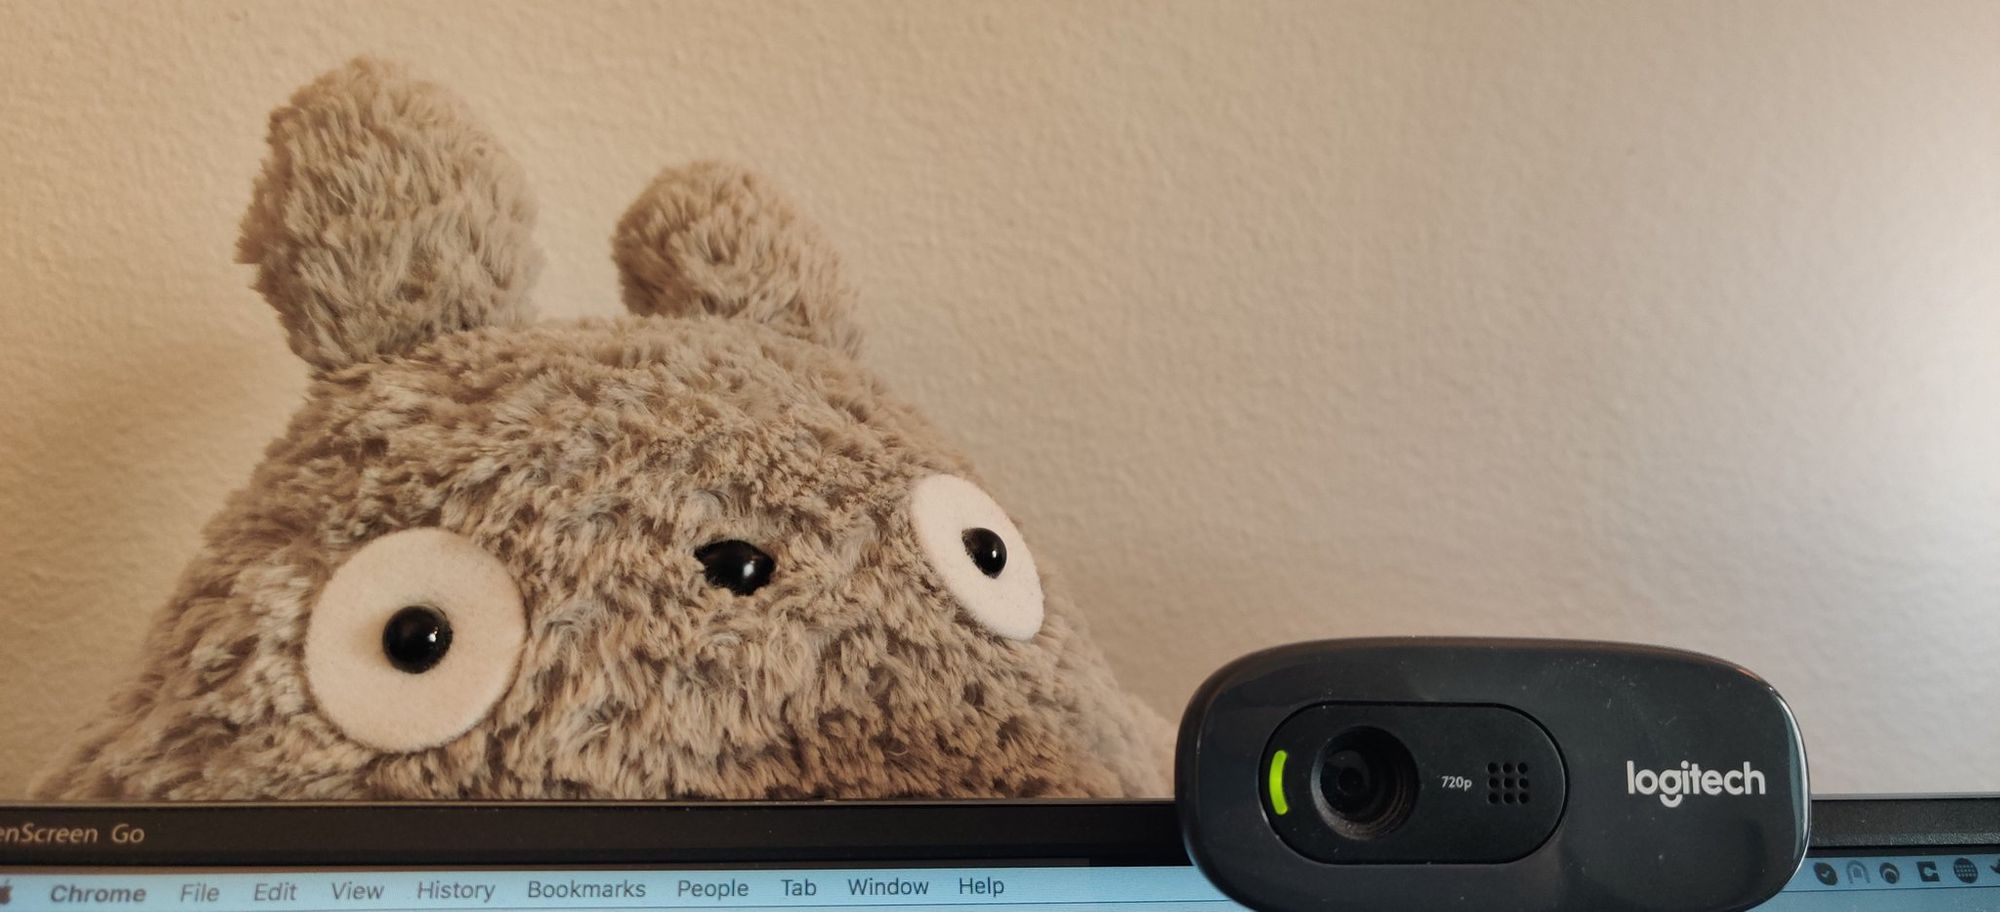 Plush Totoro sitting partially behind a screen and a webcam pointed towards the camera.